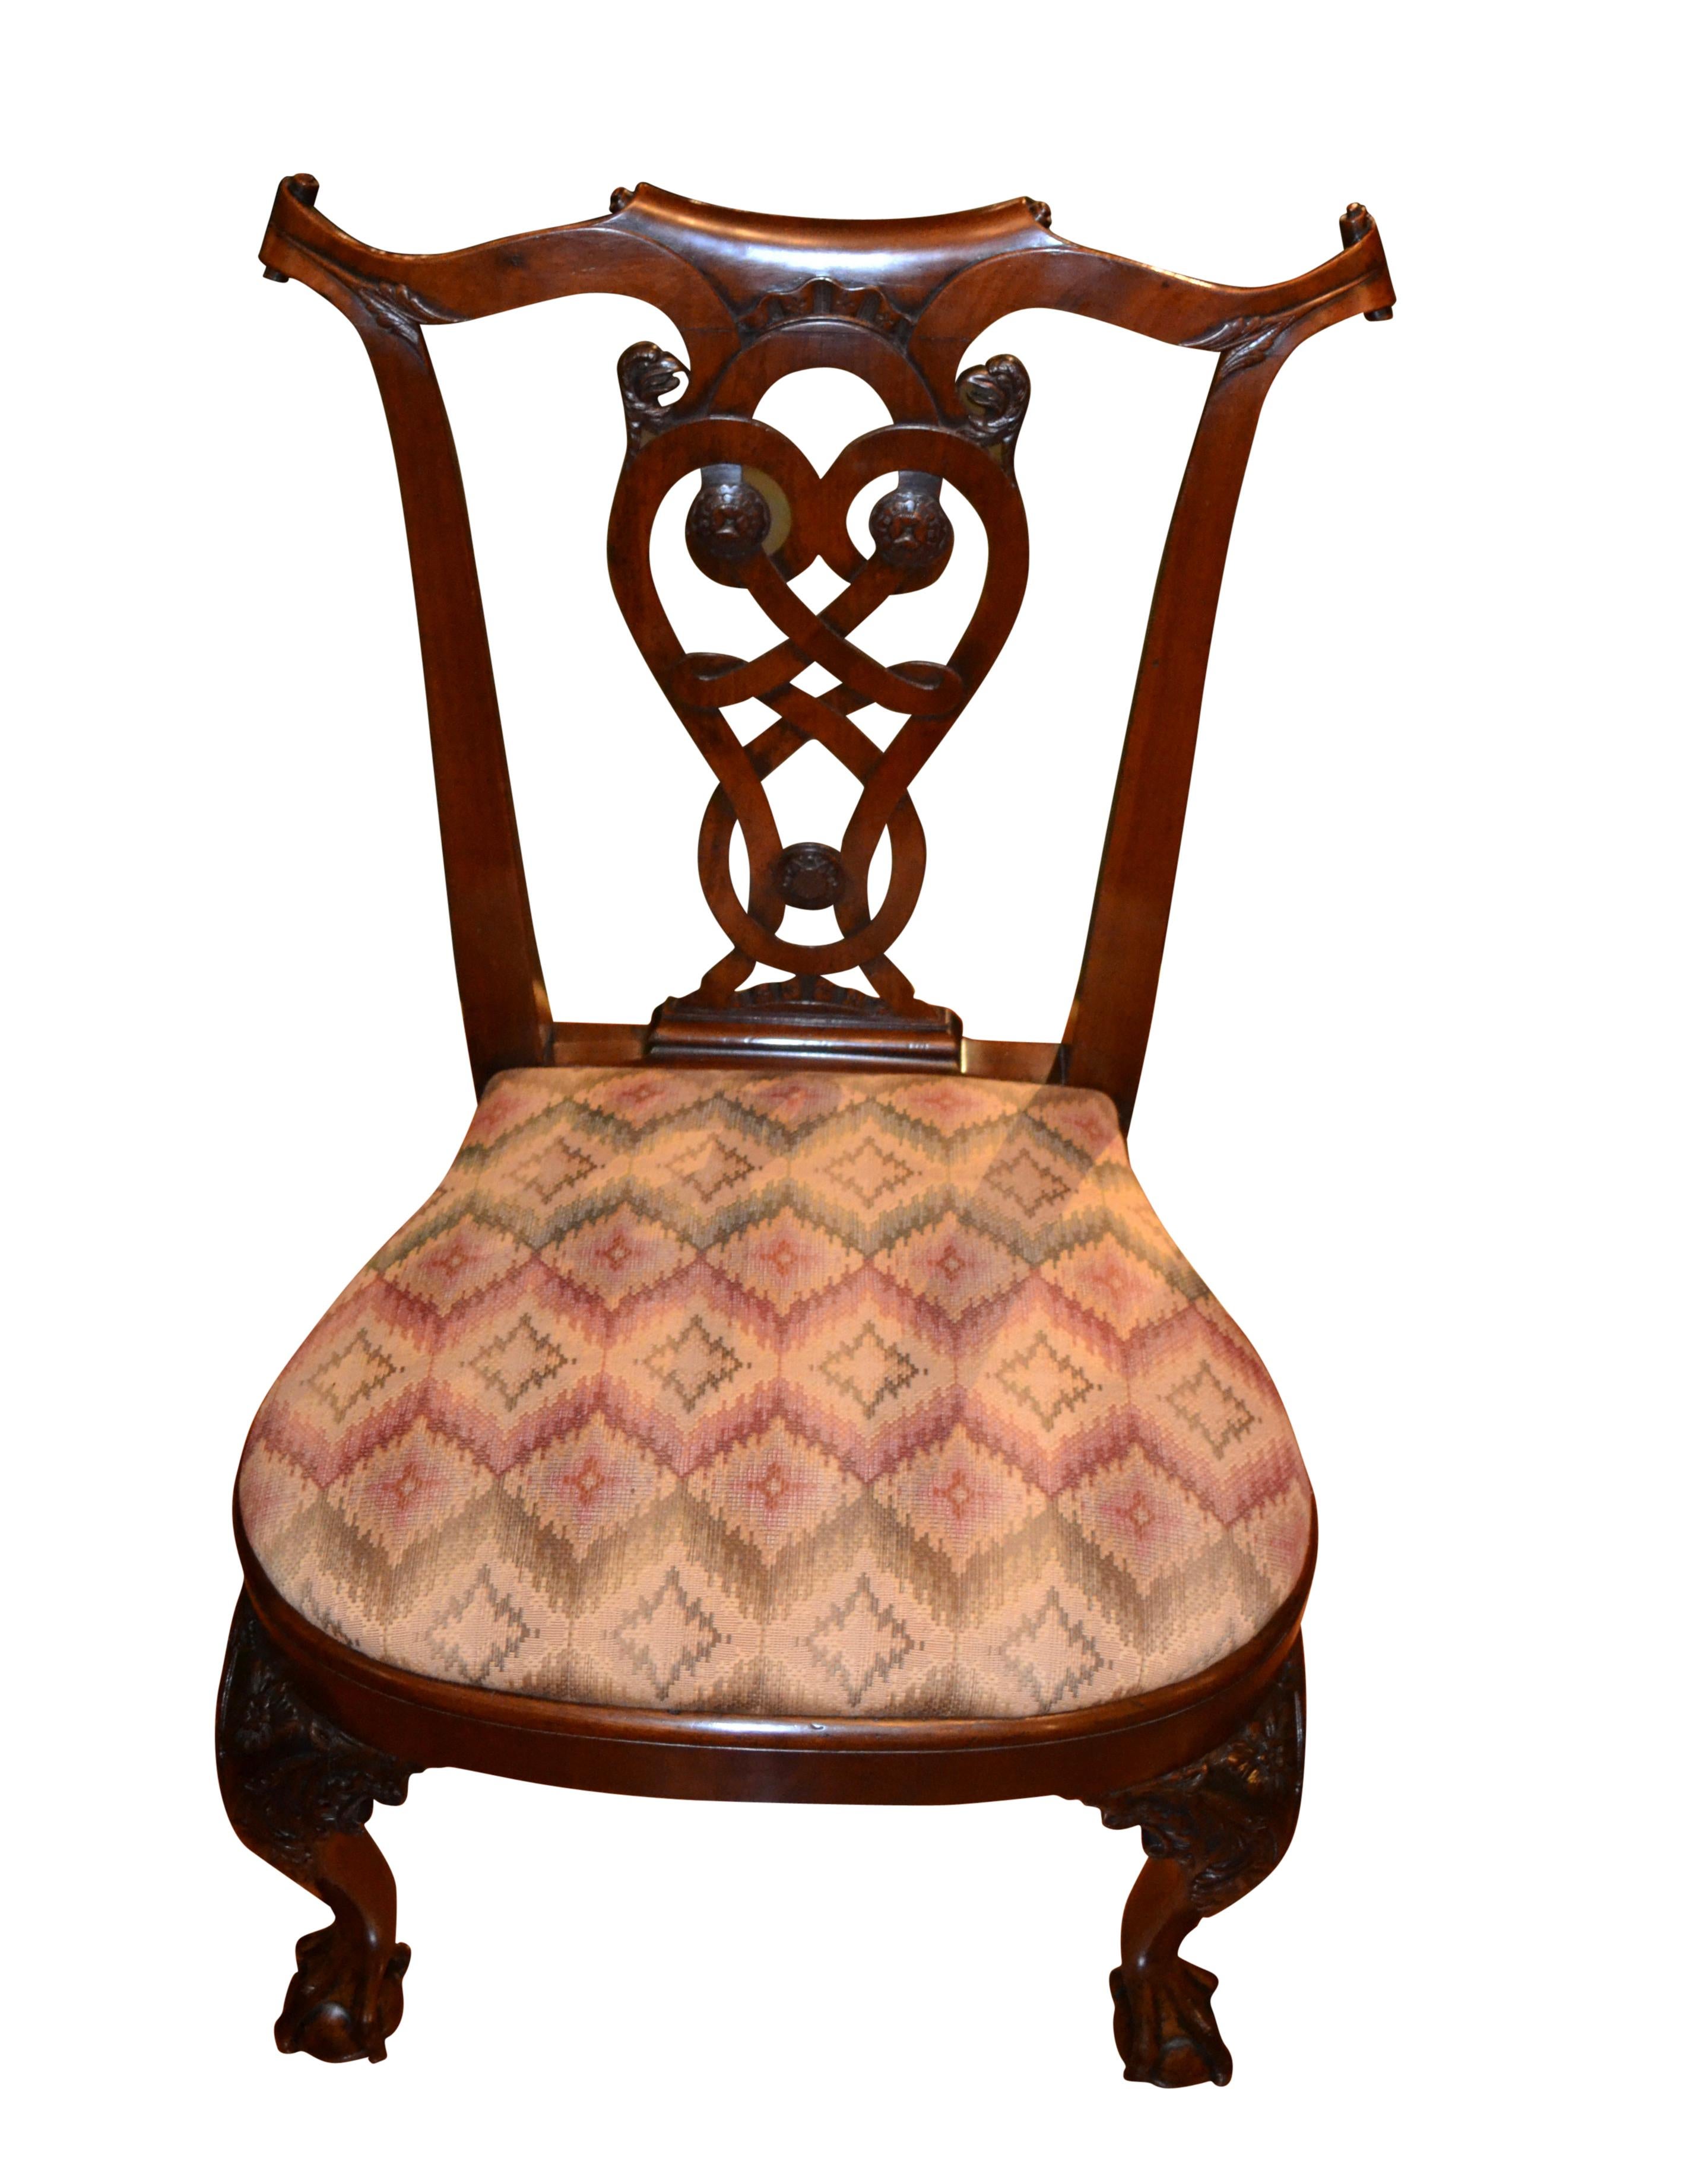 A beautifully carved stained wood open armchair in the American Queen Anne style.